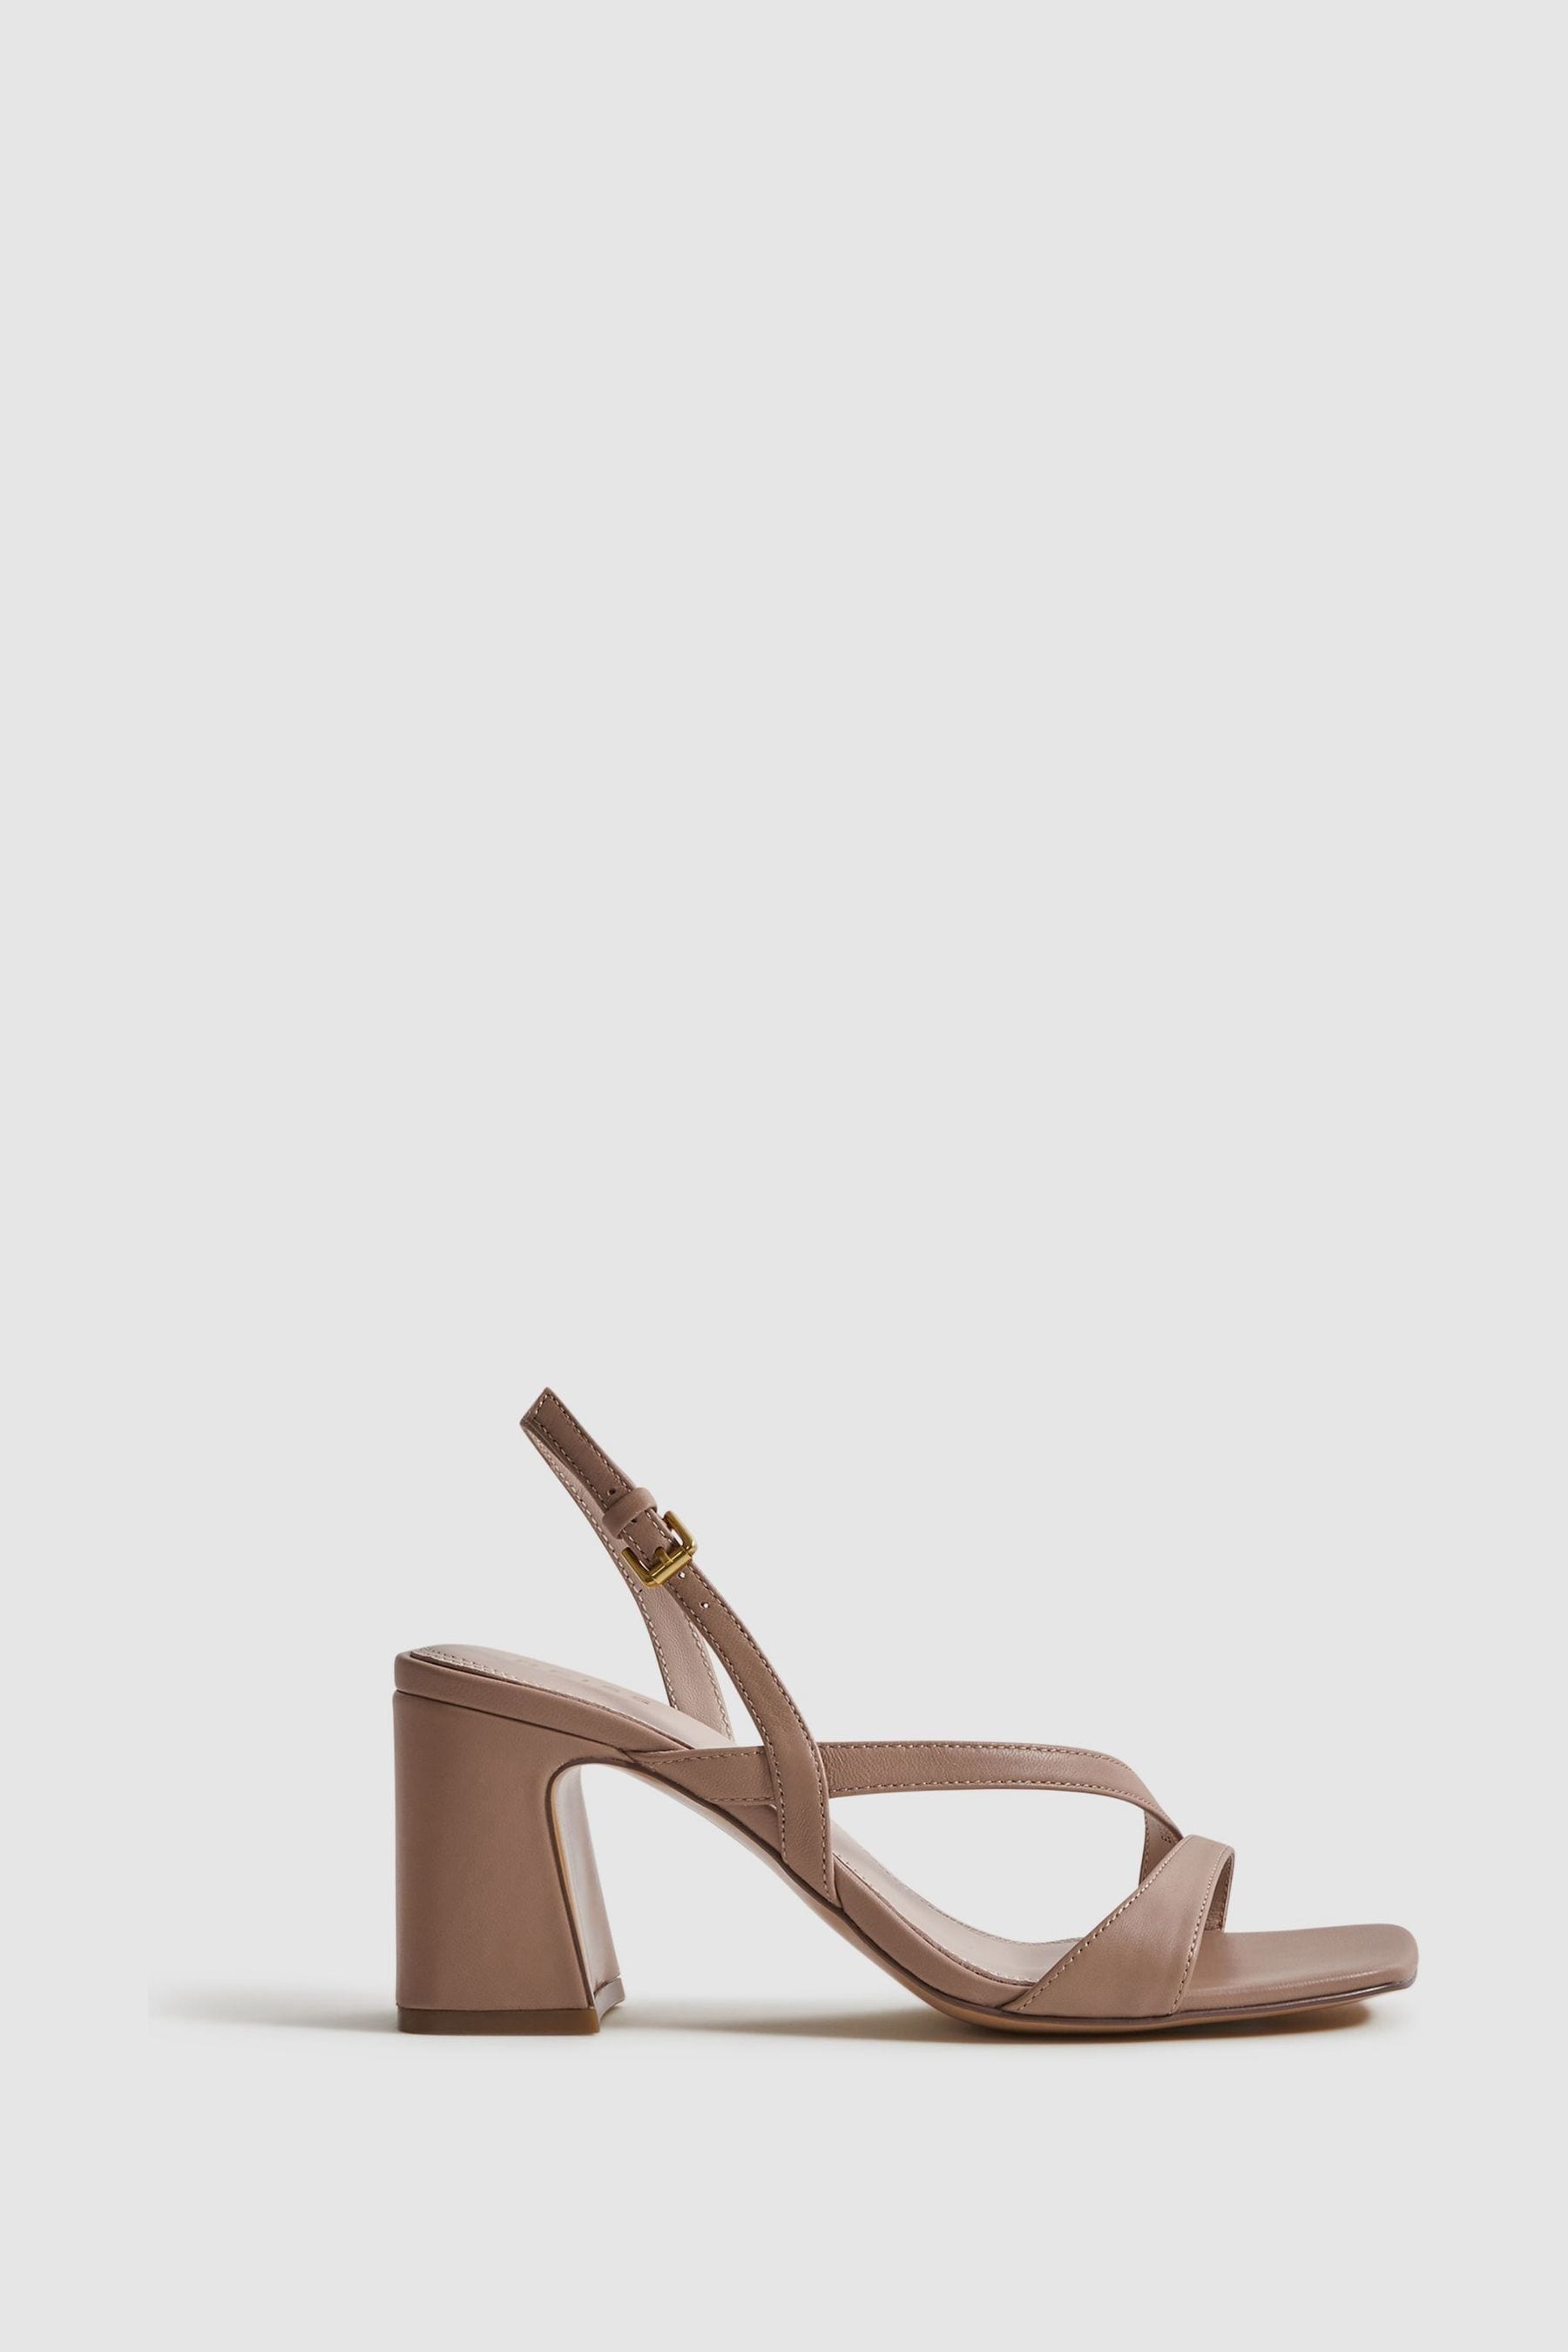 Reiss Alice - Nude Strappy Leather Heeled Sandals, Us 8